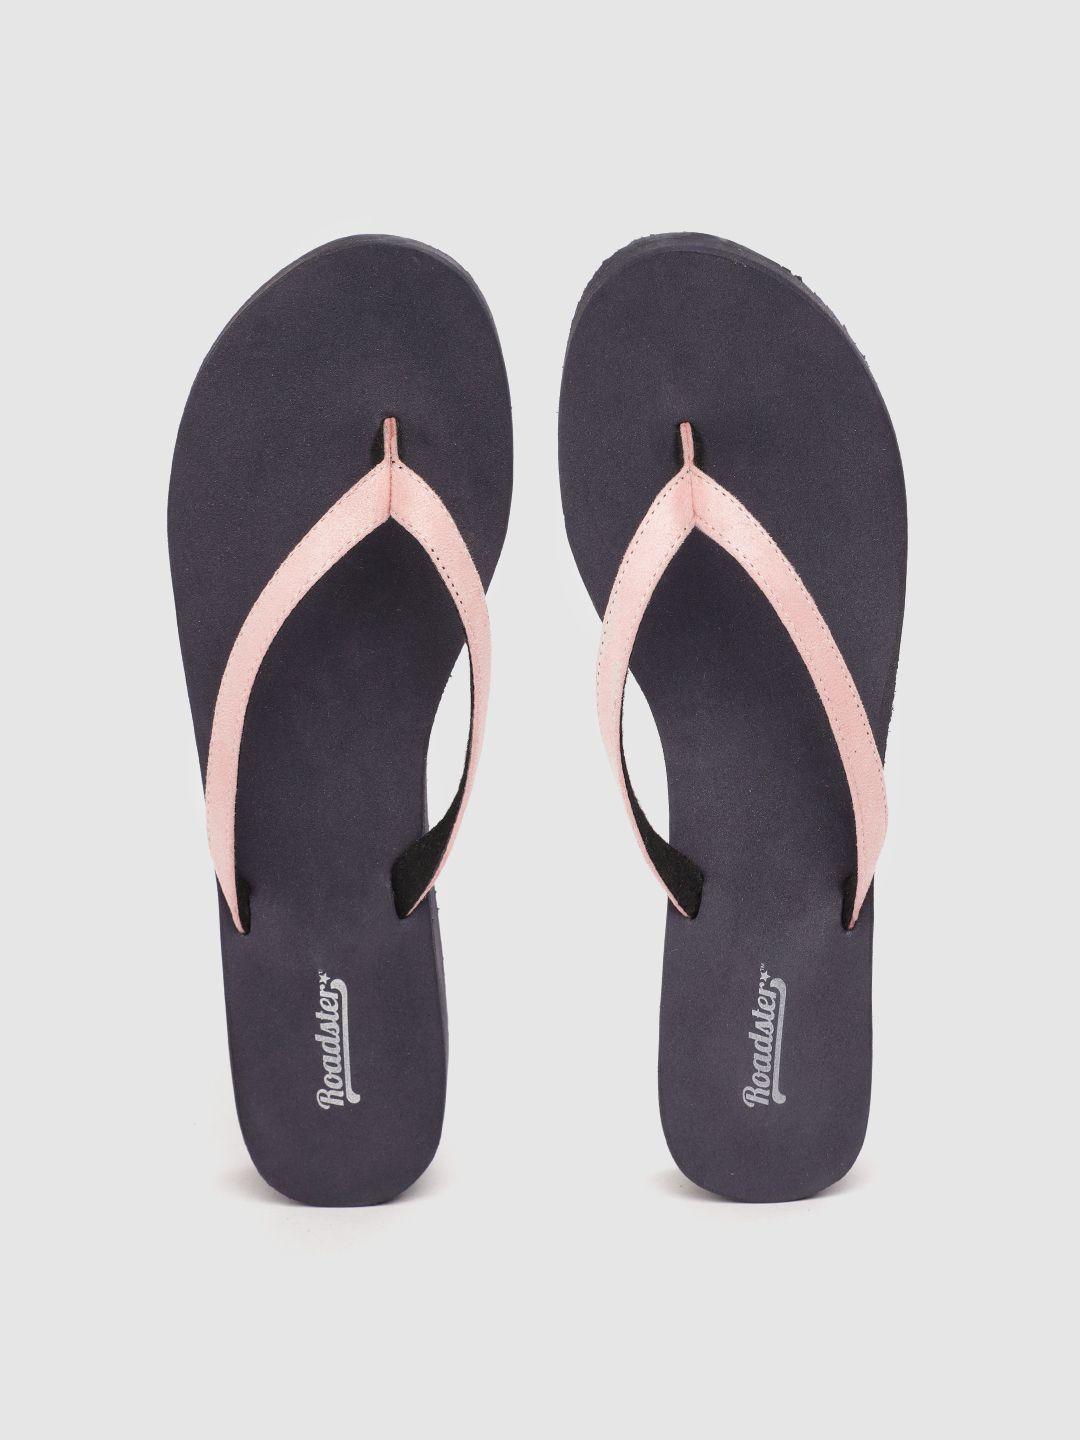 the roadster lifestyle co women peach-coloured solid thong flip-flops